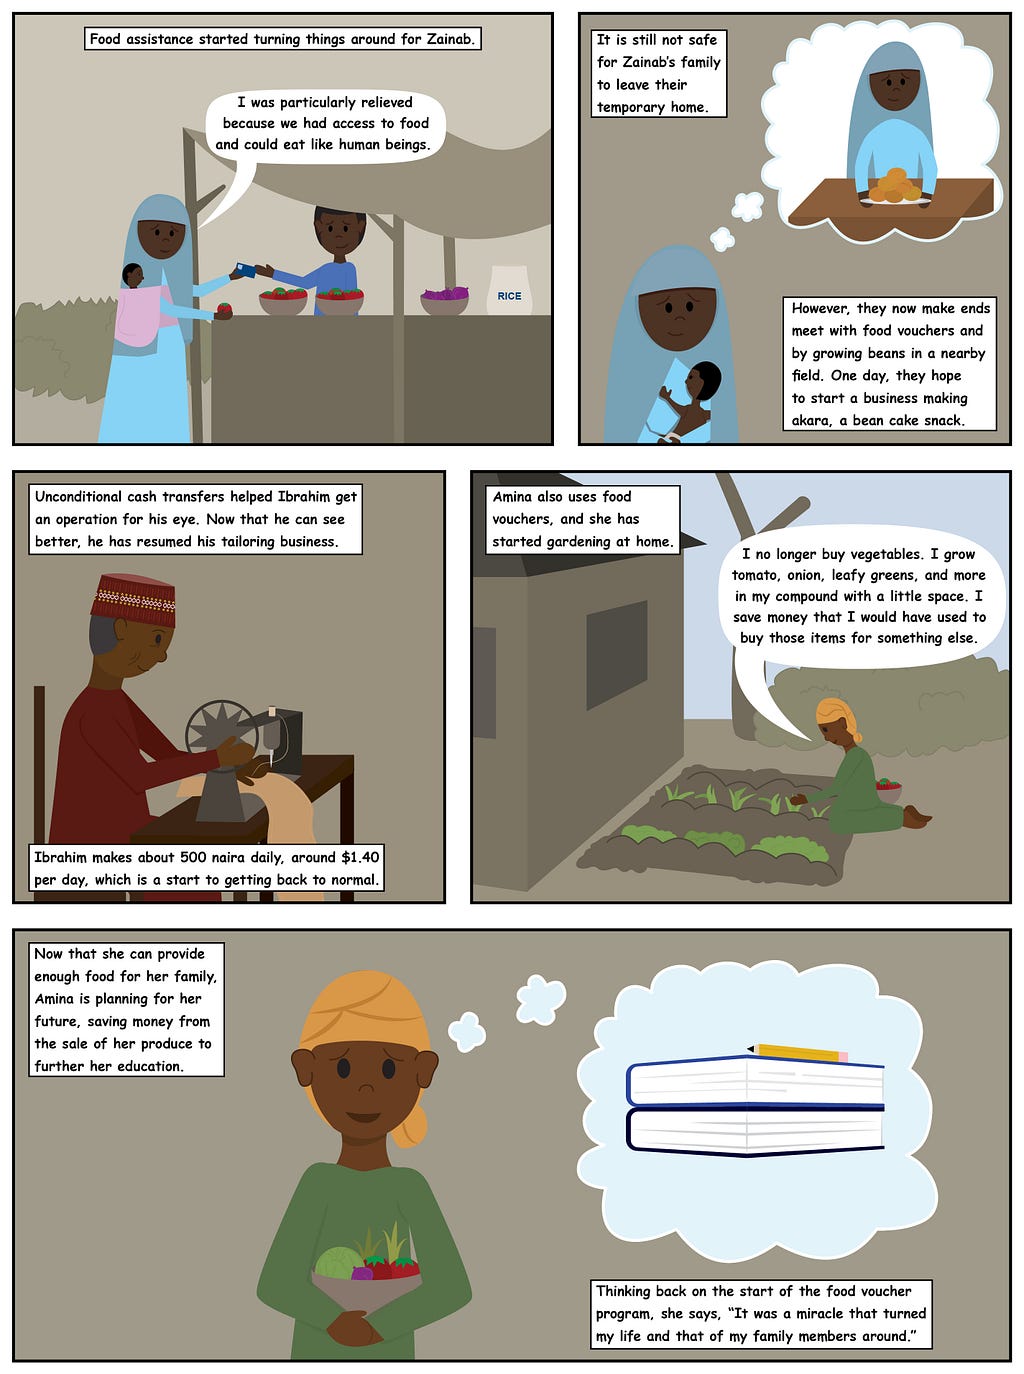 Illustrations show how USAID-supported food assistance helped the families regain some normalcy and plan for their futures.